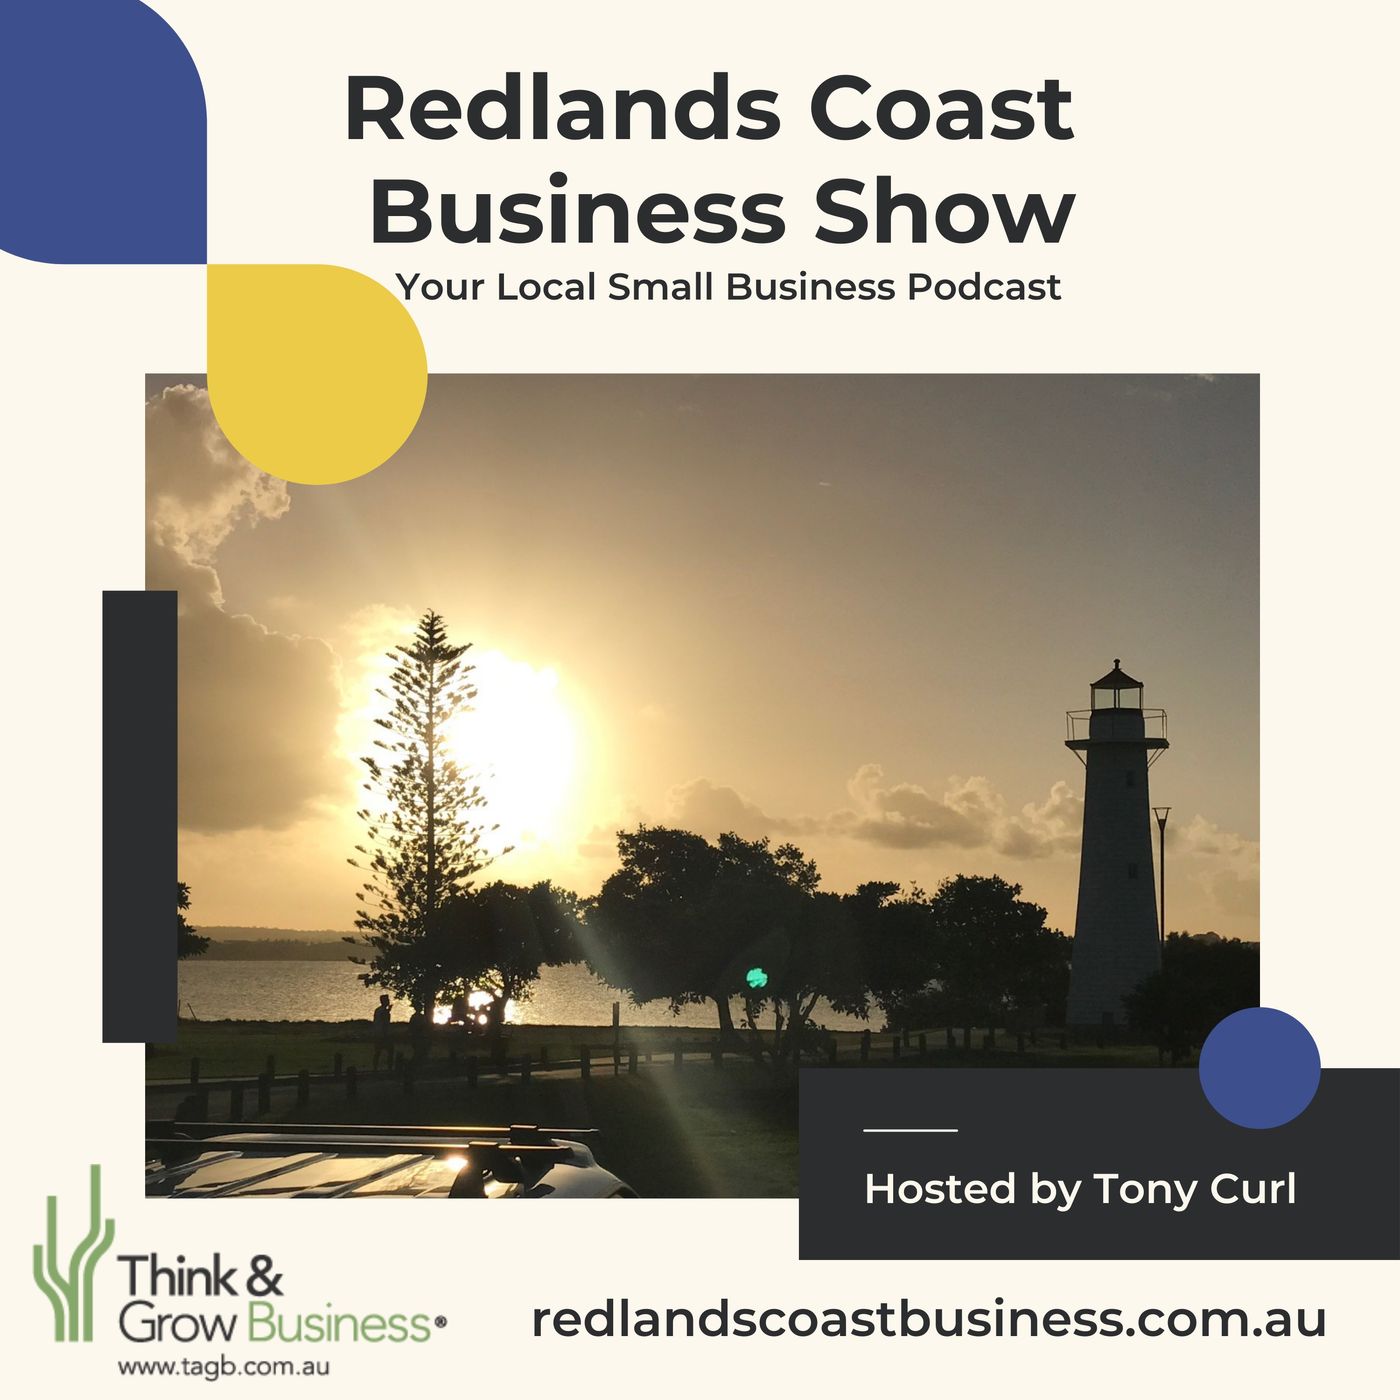 Introduction to the Redlands Coast Business Show